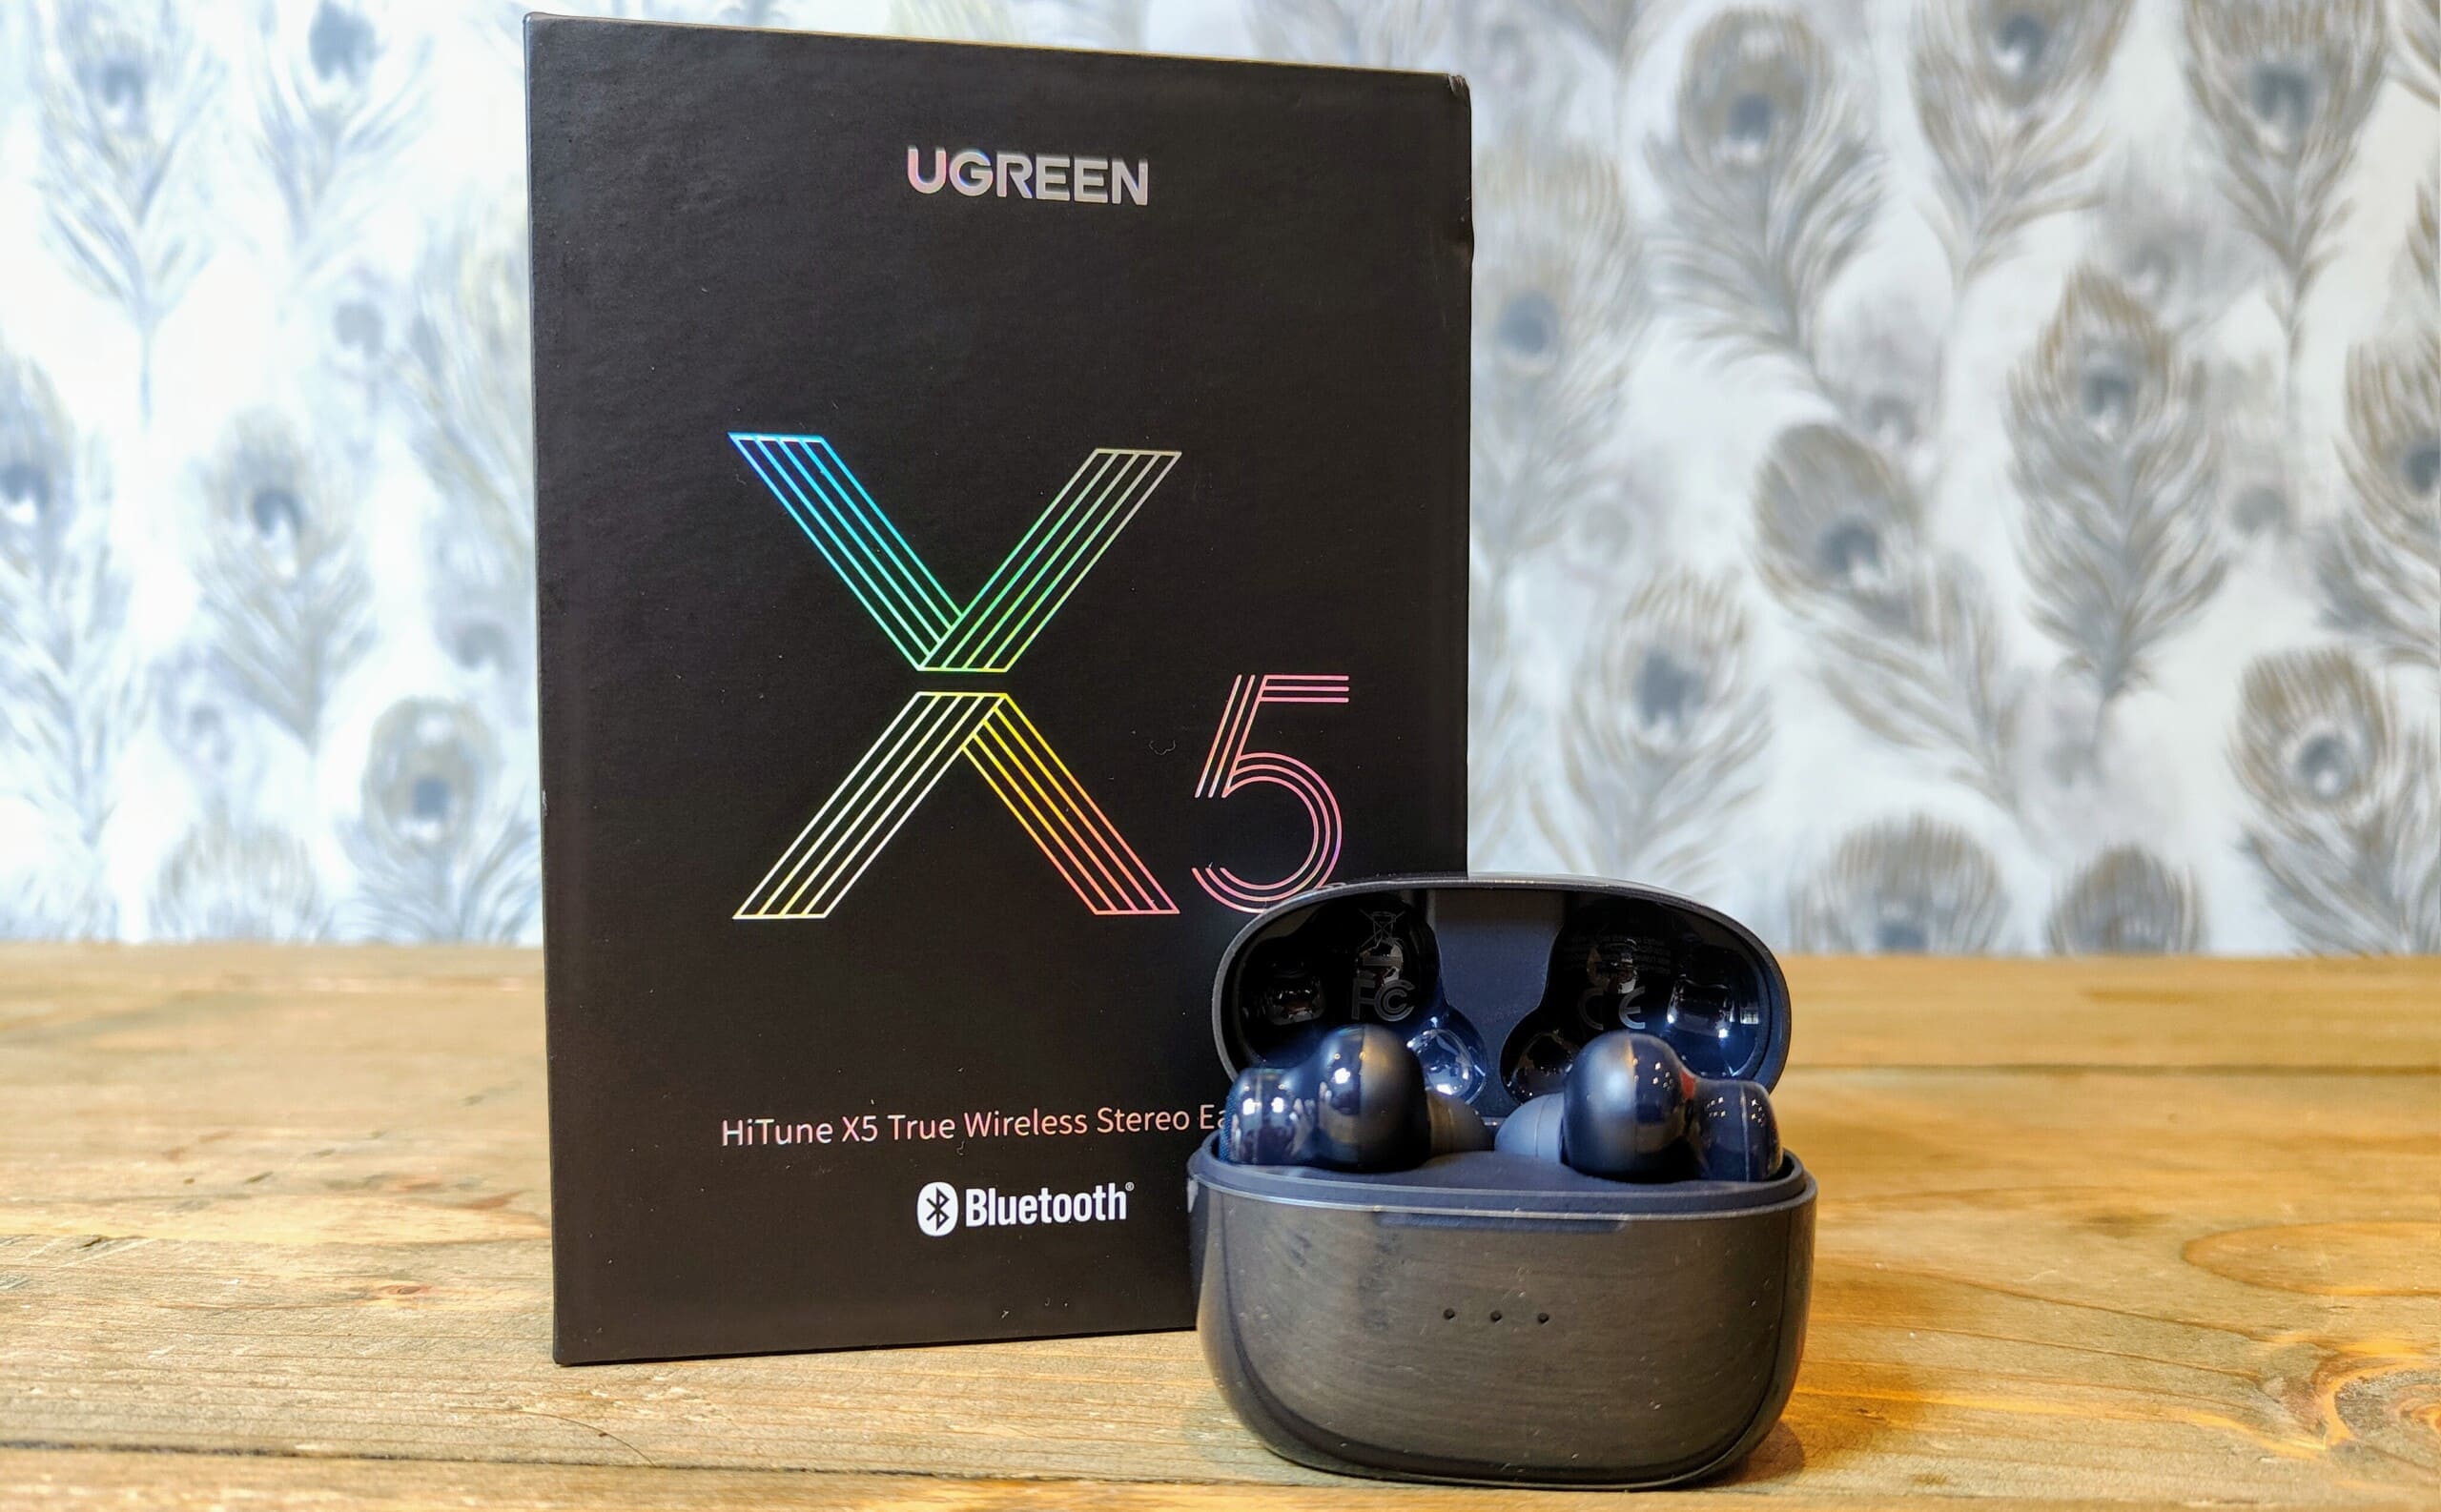 Ugreen HiTune X5 True Wireless Earbuds Review – Another good aptX earbud thanks to Qualcomm QCC3040